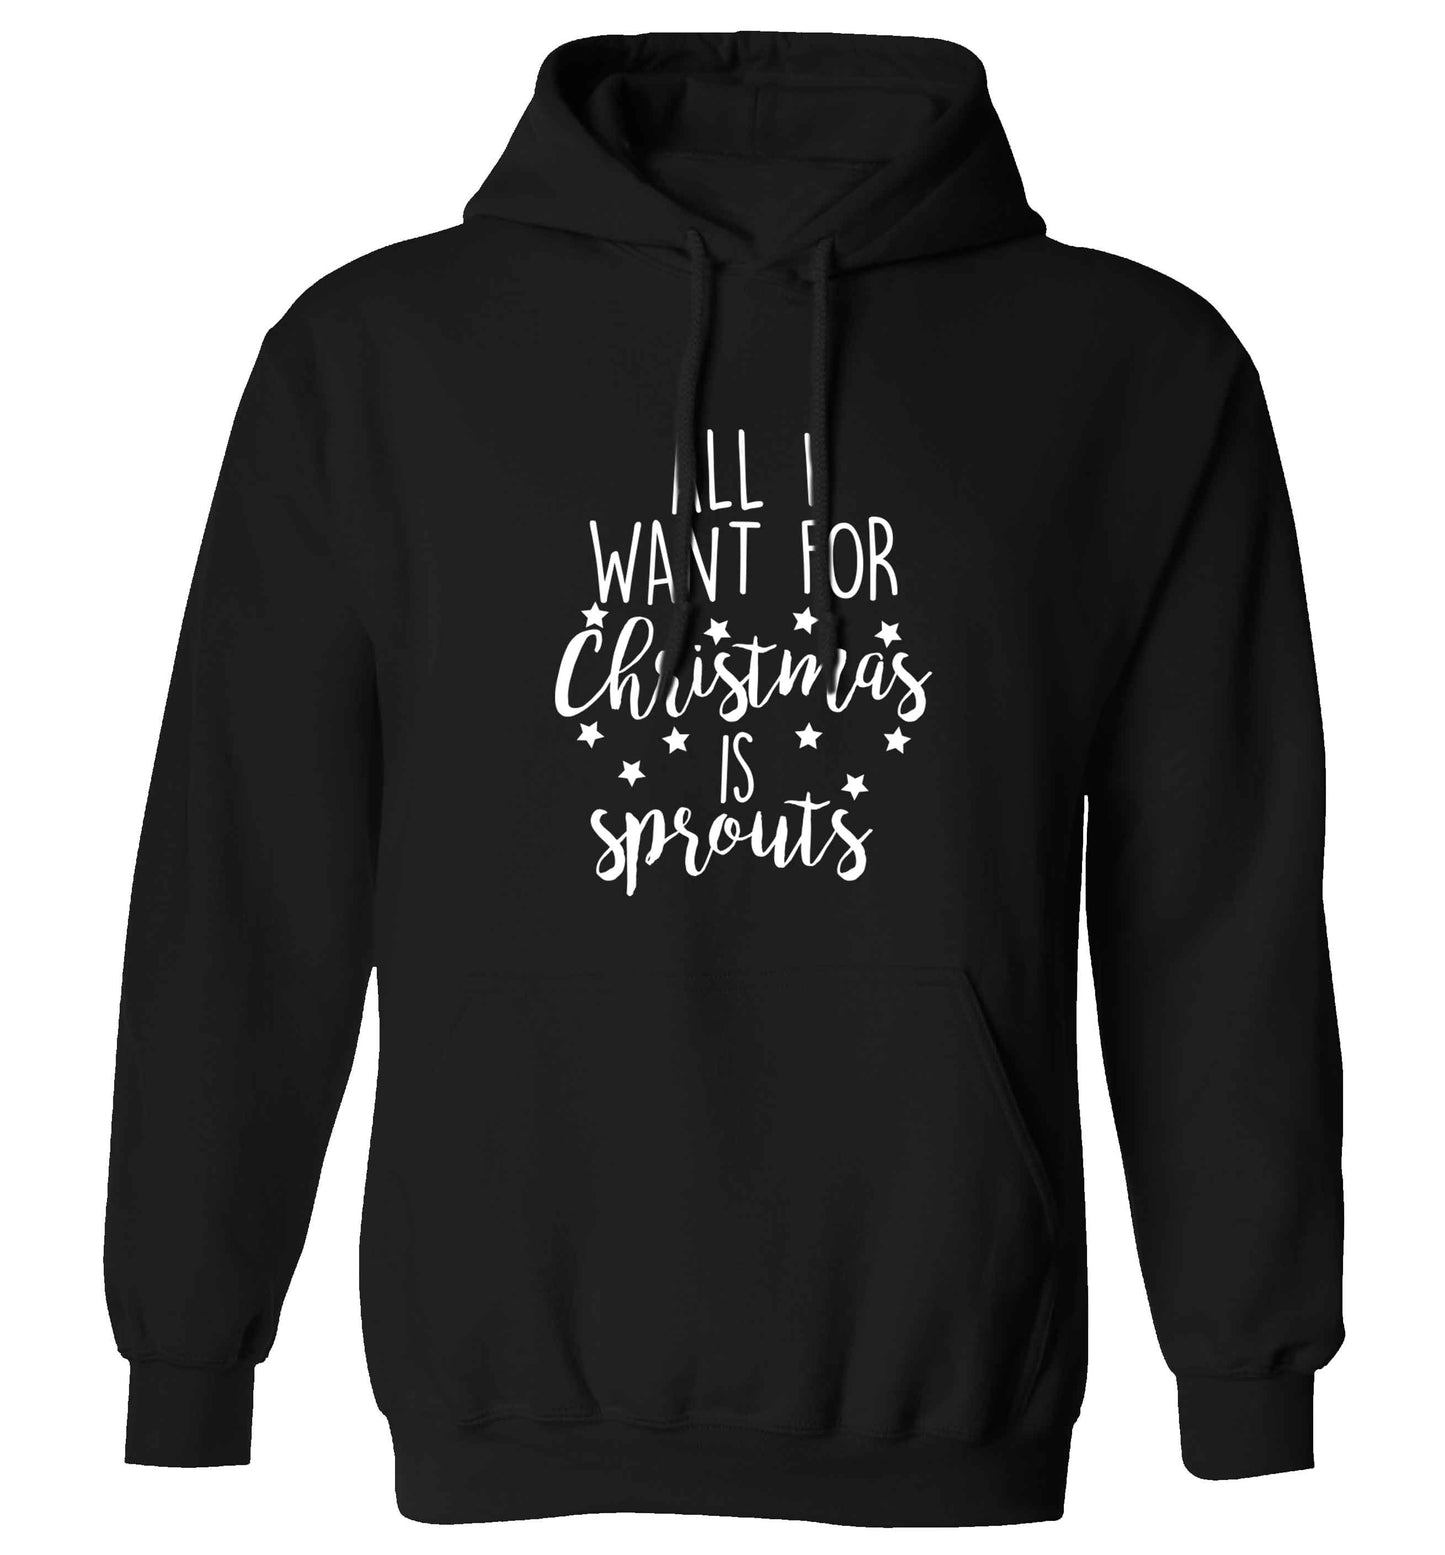 All I want for Christmas is sprouts adults unisex black hoodie 2XL